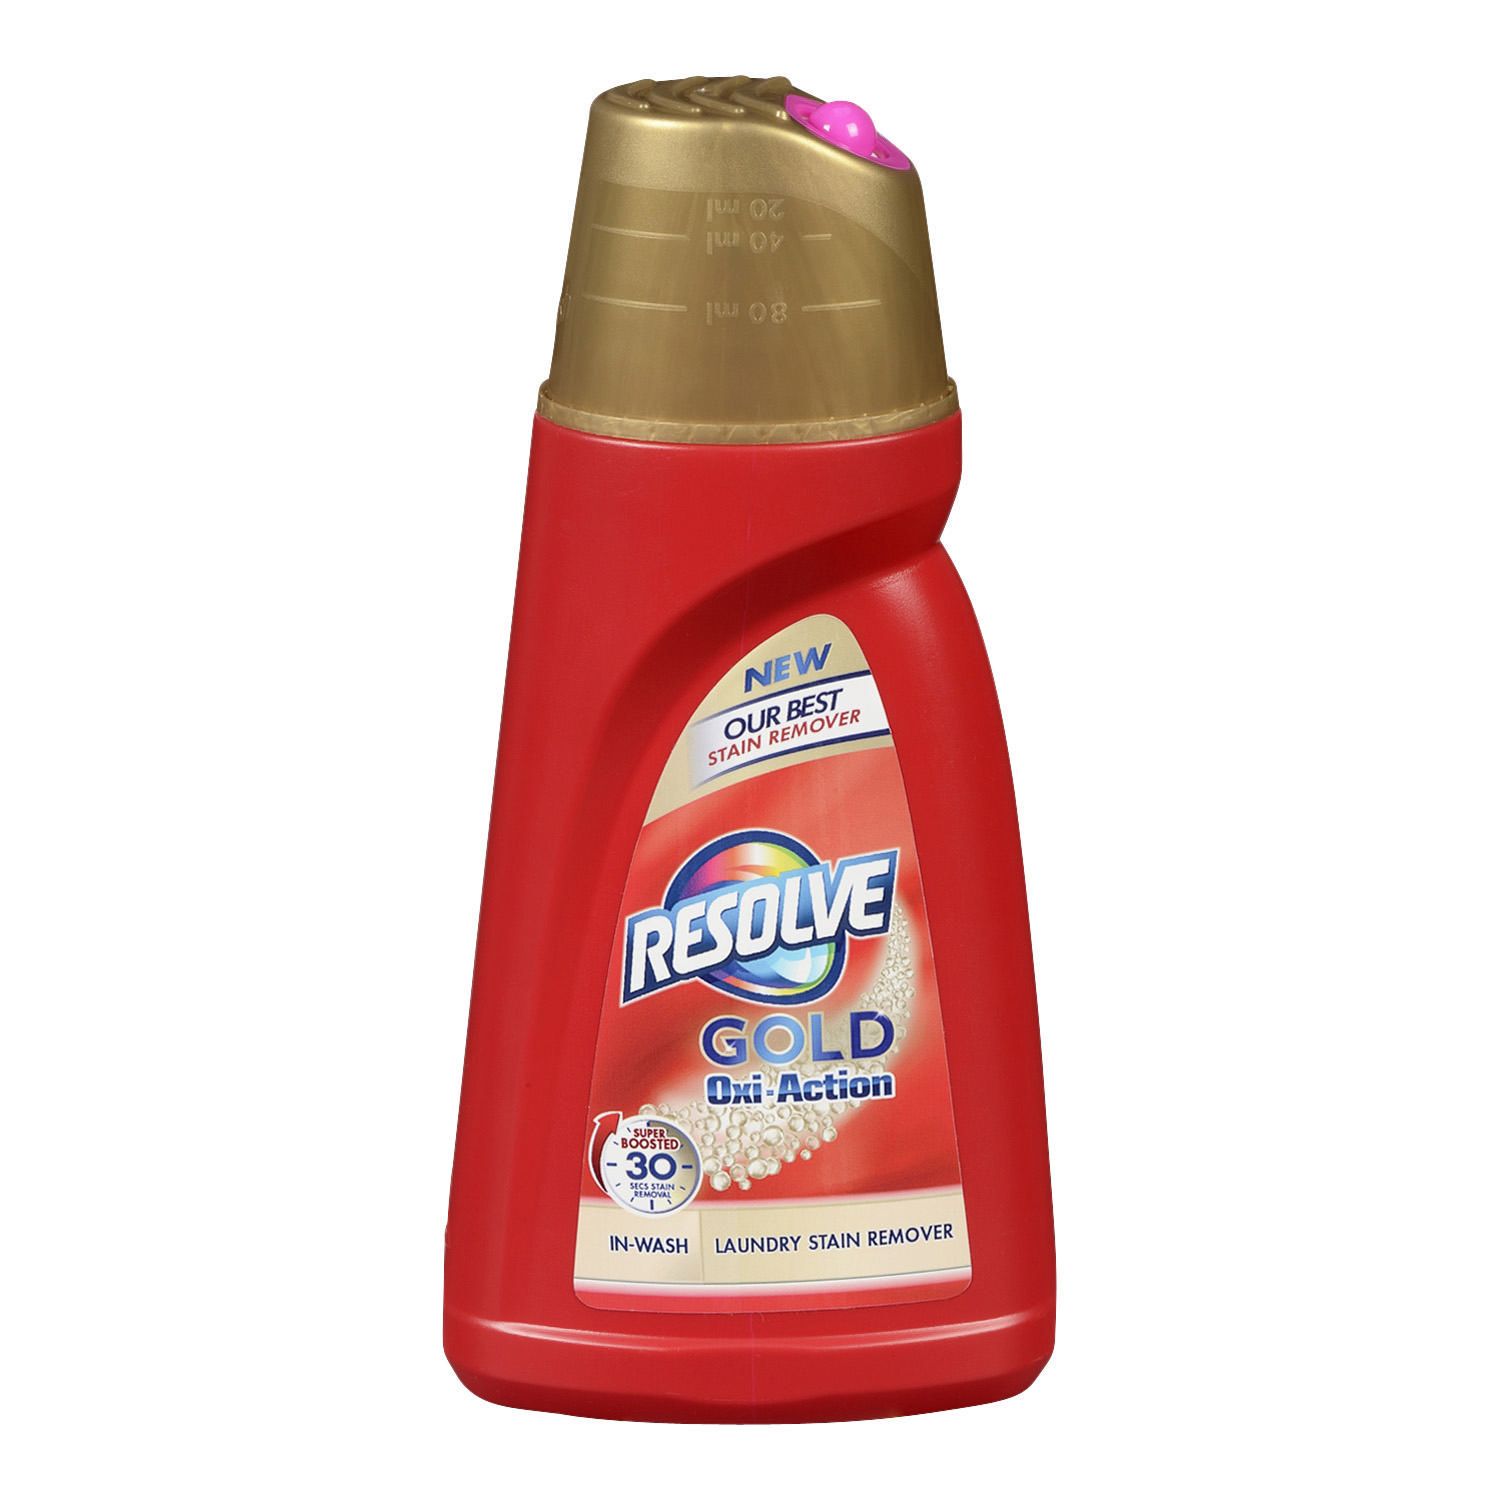 resolve-gold-oxi-action-fabric-stain-remover-in-wash-gel-1l